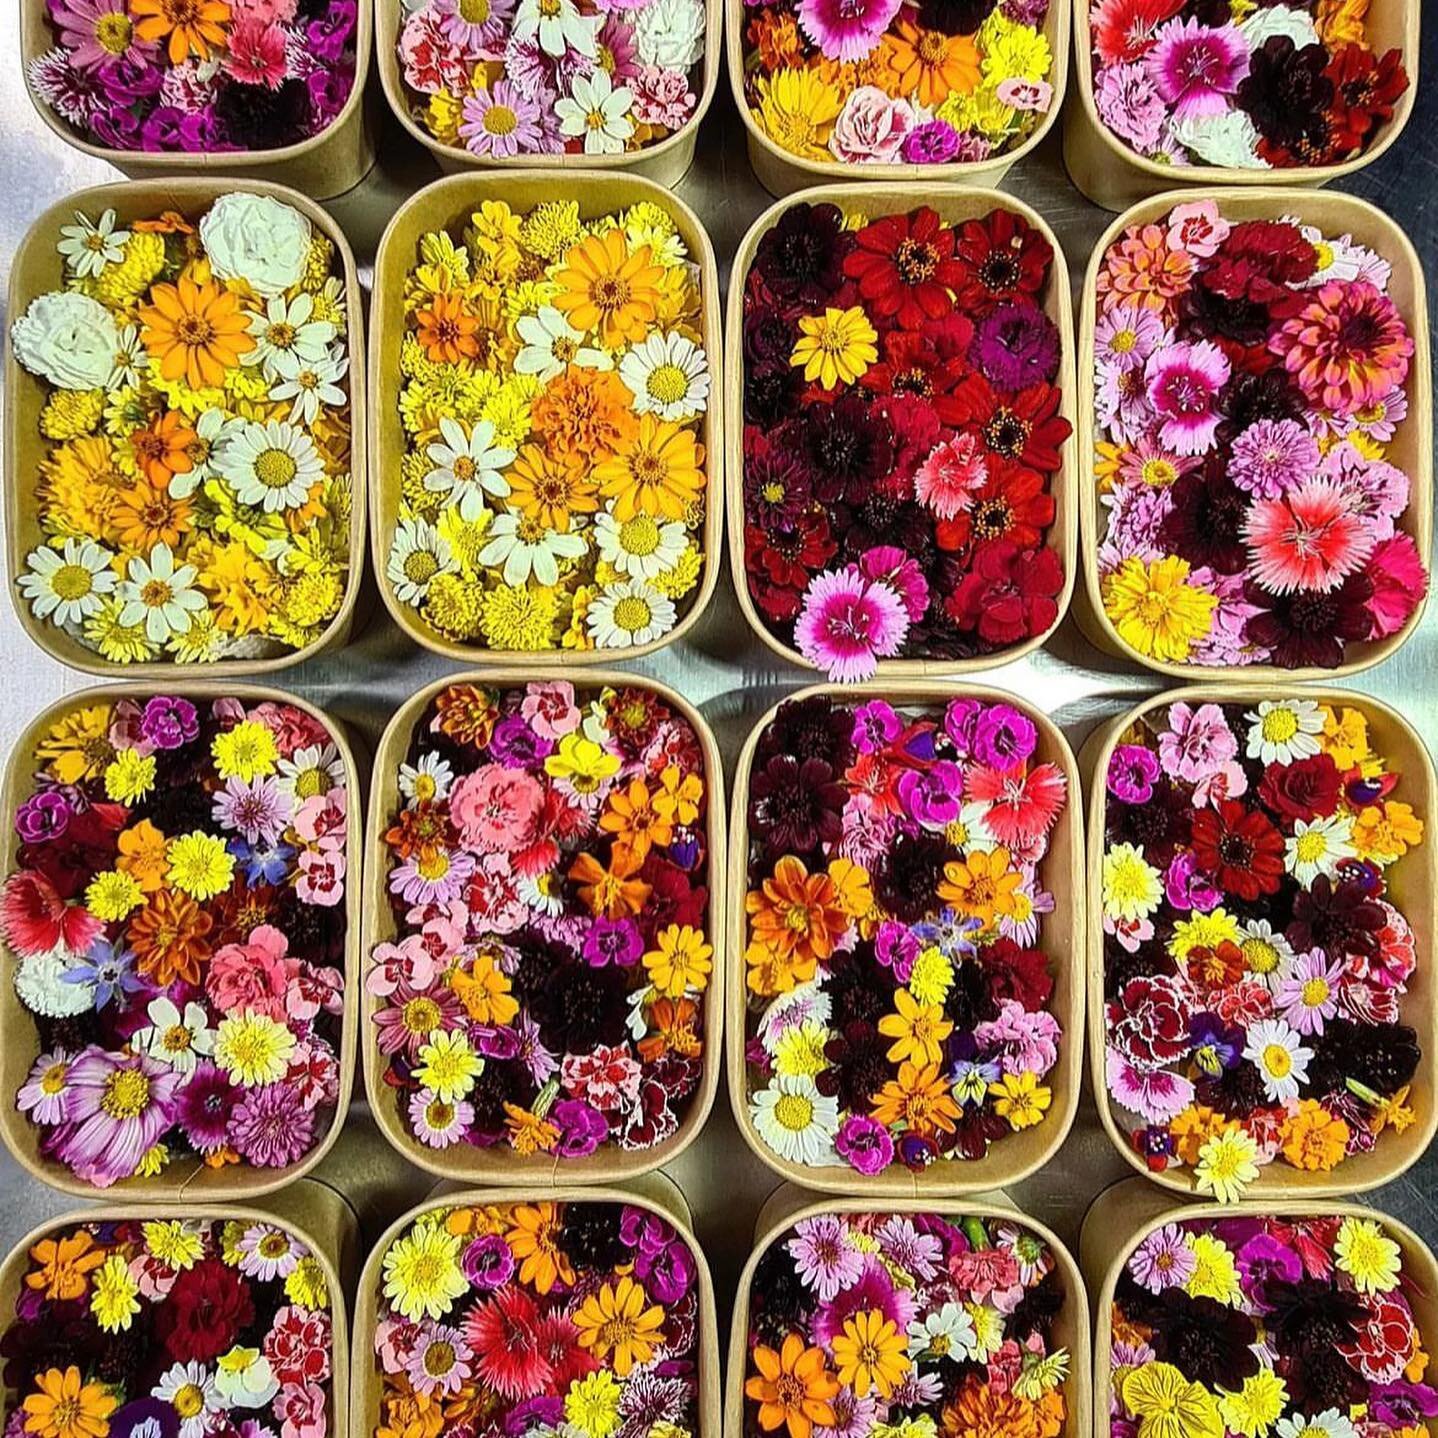 Yesterday we shared all about growing microgreens in a GROWTunnel, but did you know you can also grow flowers &ndash; both for eating, and for looking at!

Check out @fivesixtyfarms' beautiful array of edible flowers! Available at the local markets i